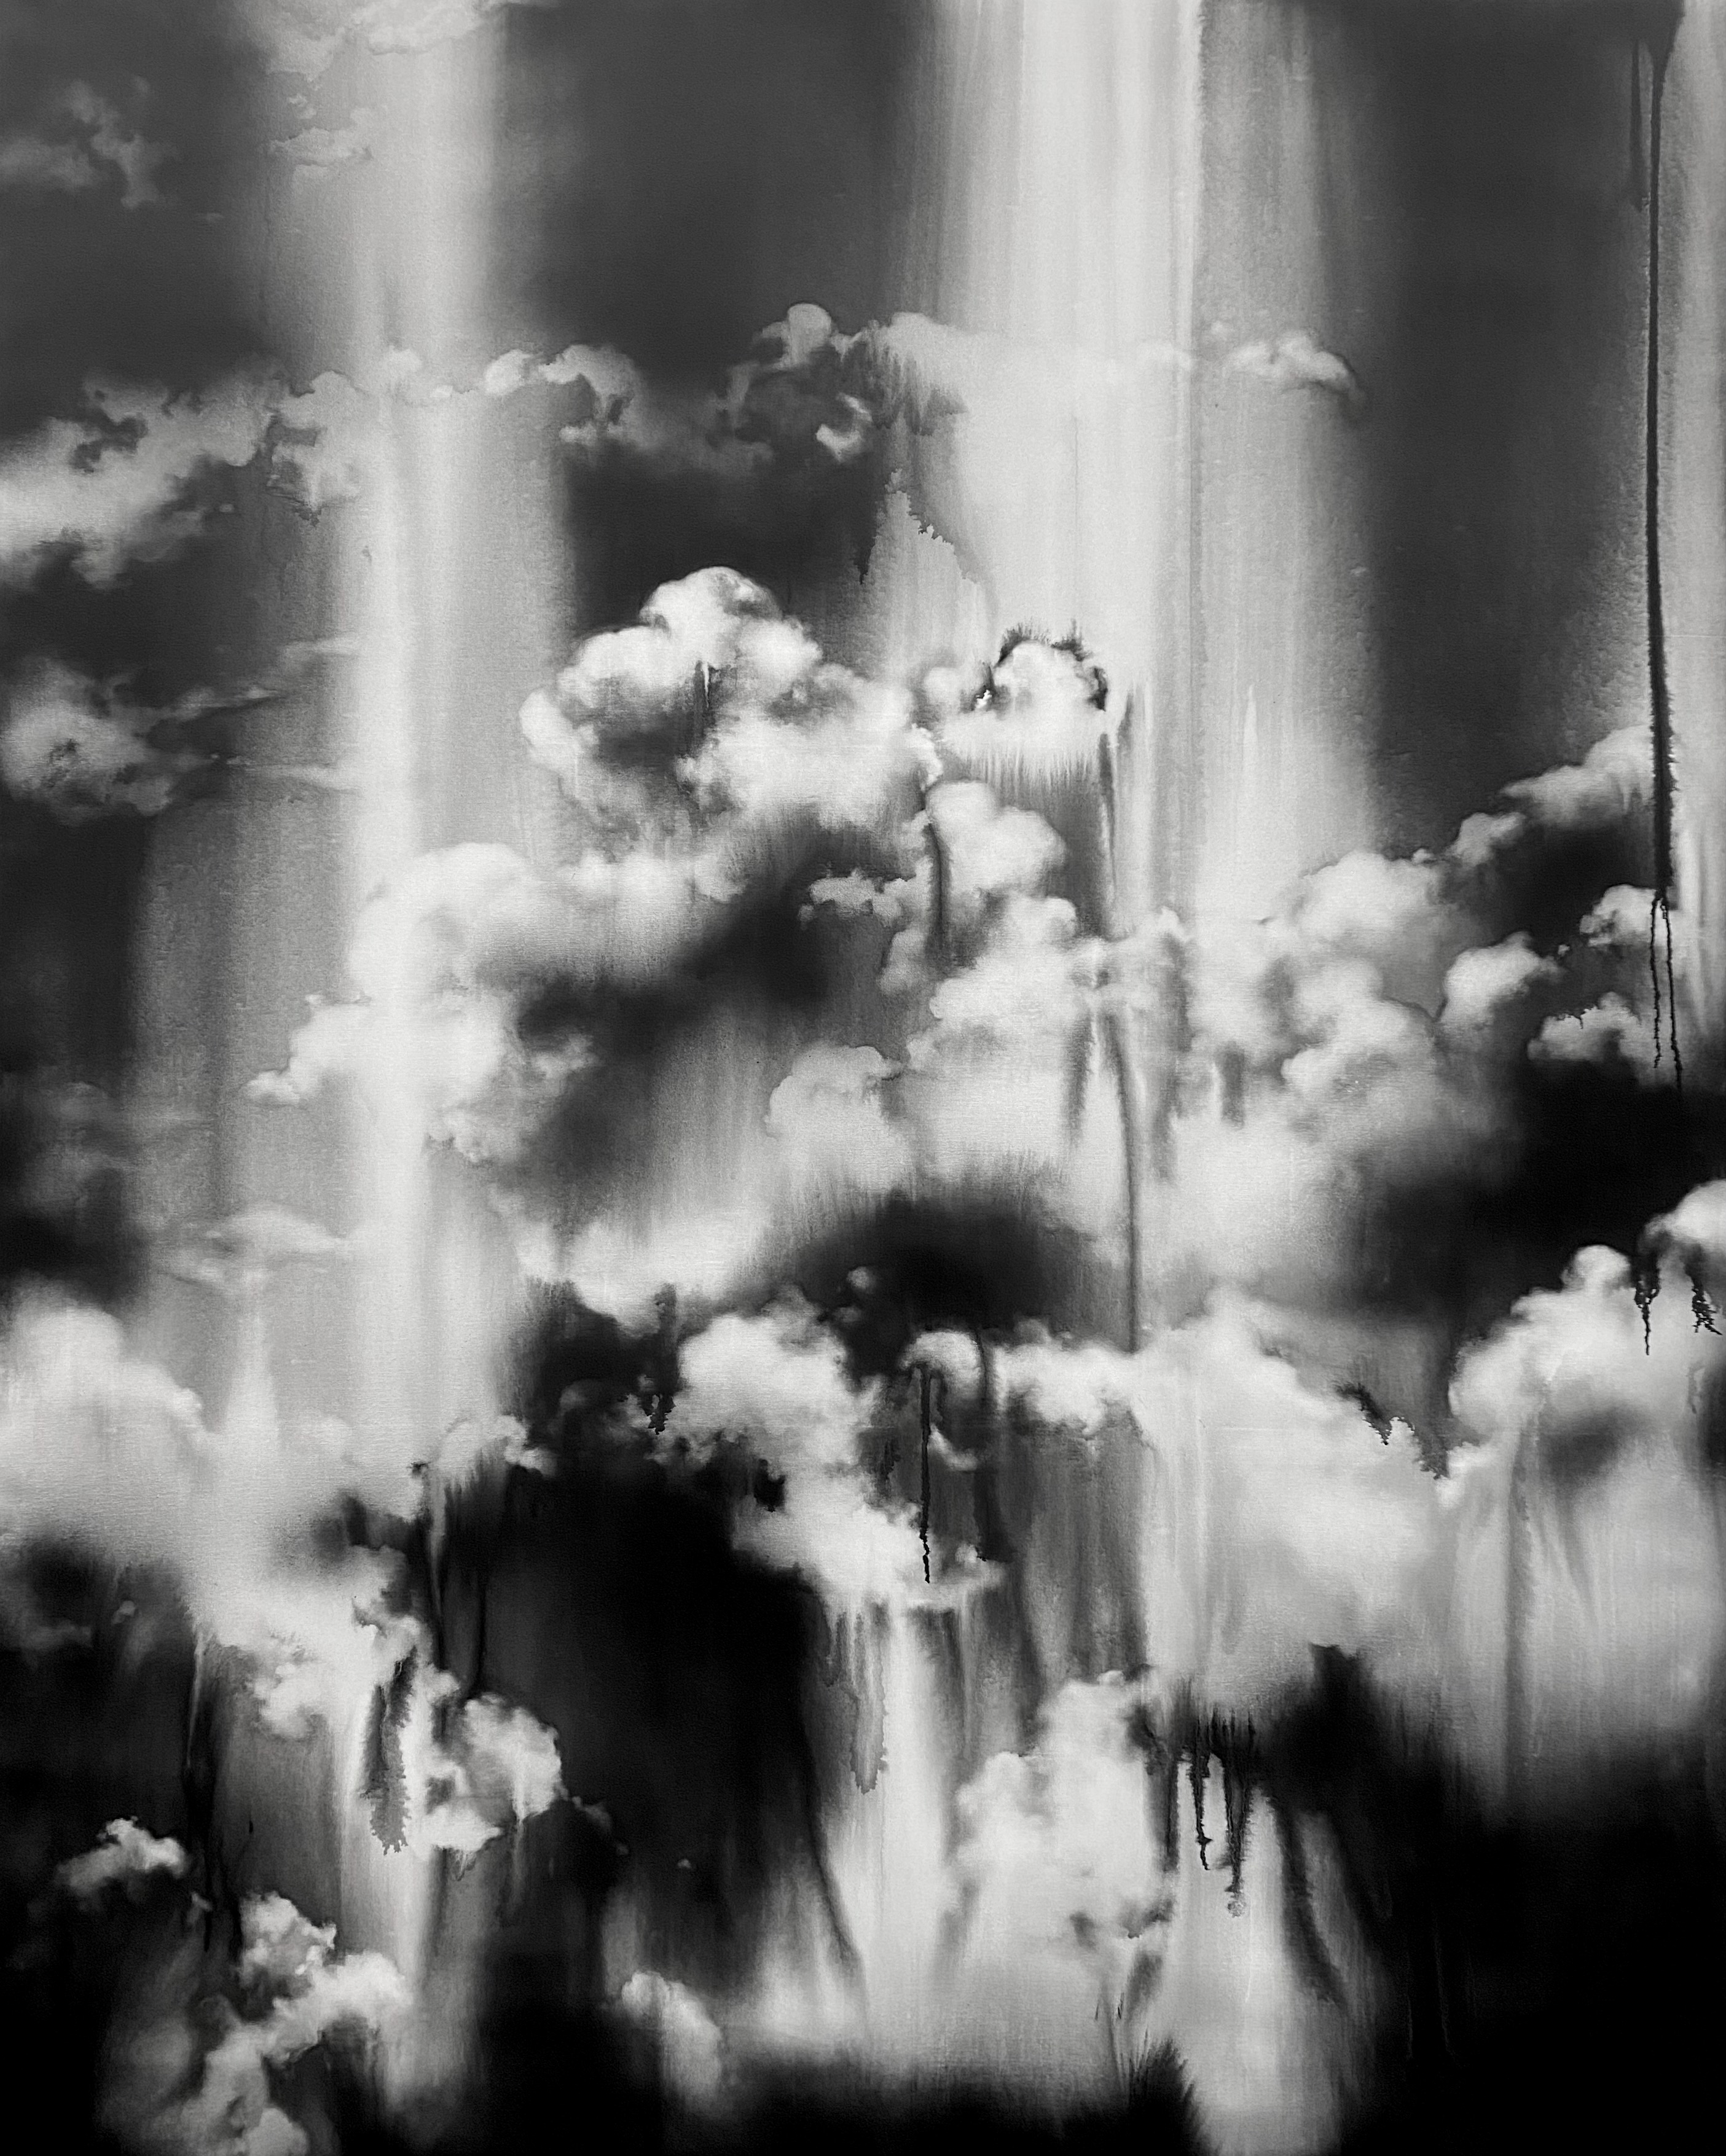 From the series Clouds